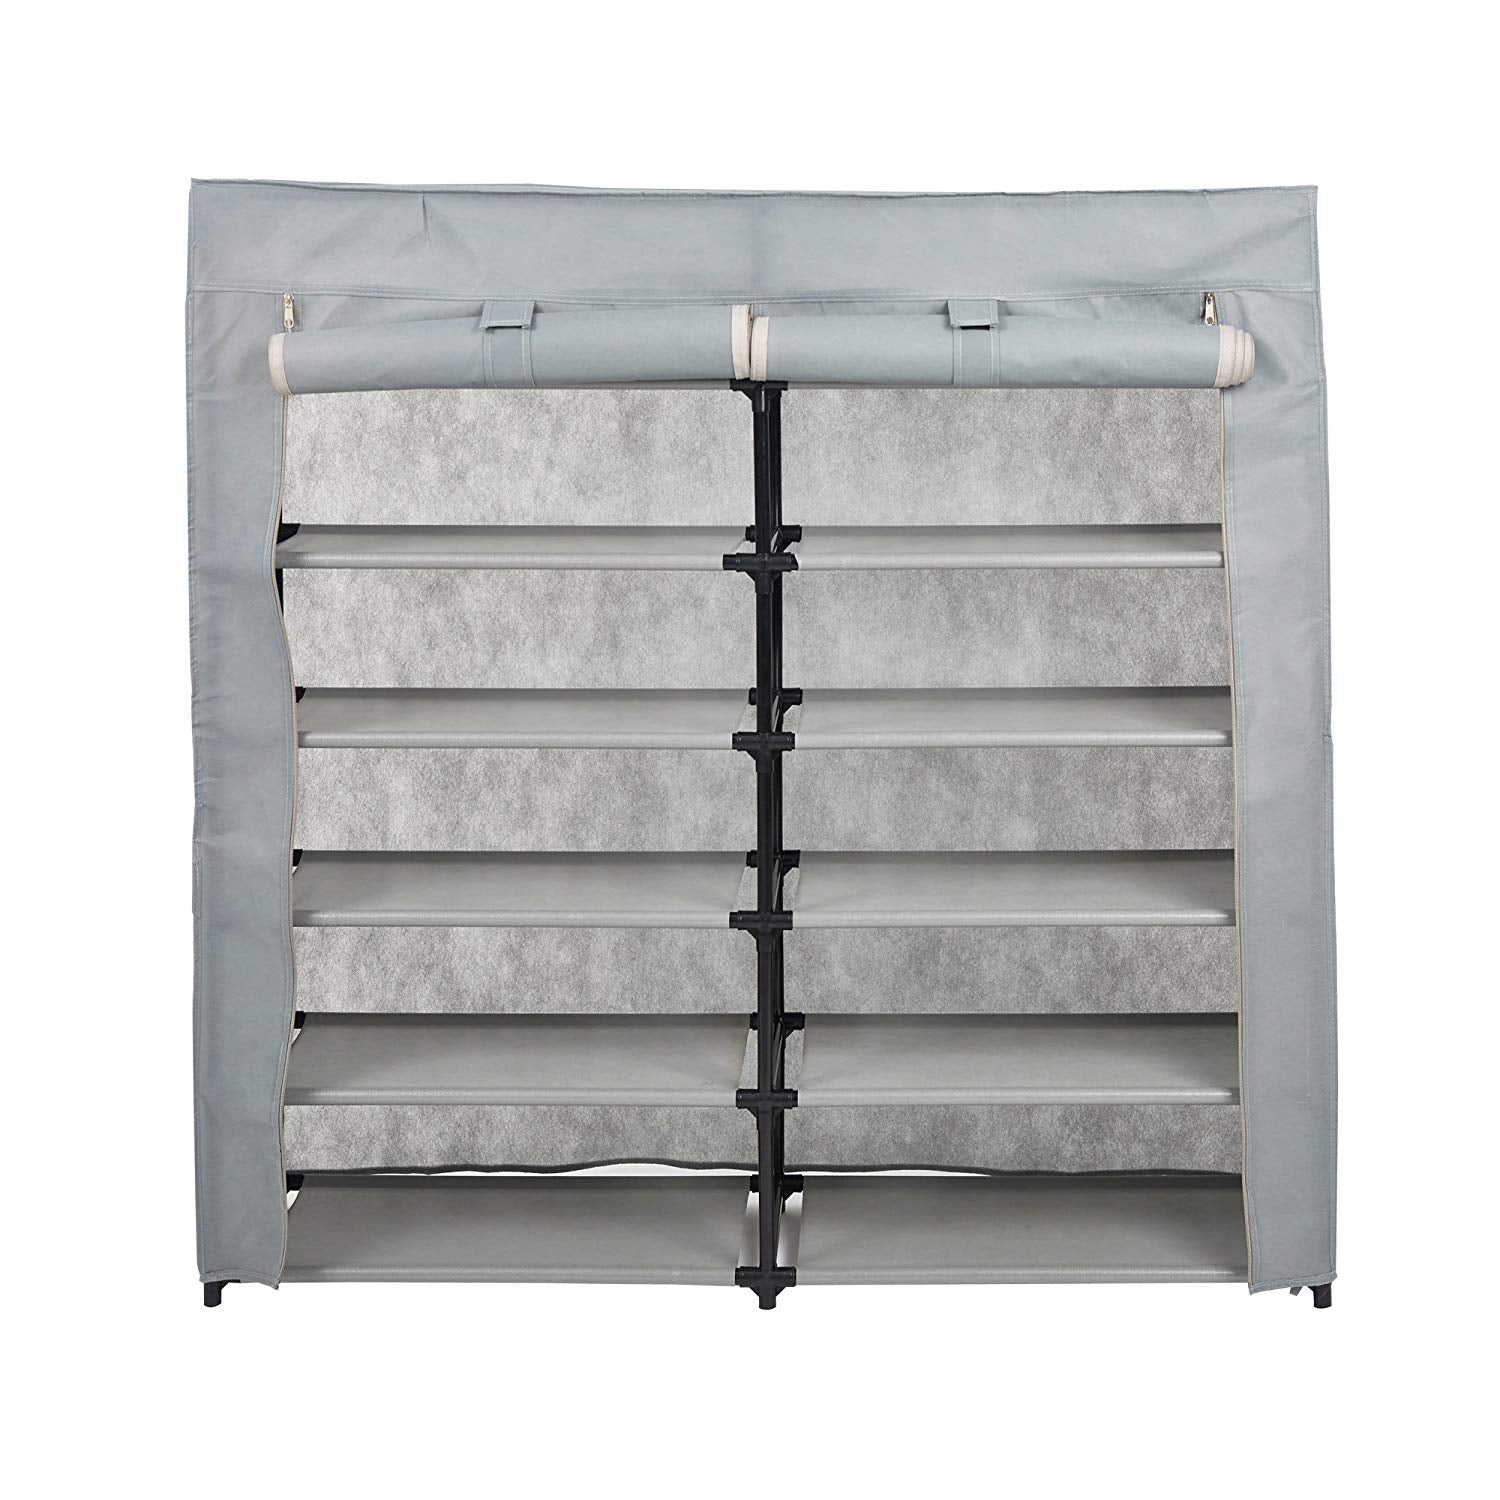 Bosonshop Shoe Rack 6-Tier 36 Pair Shoe Storage Organizer with Dustproof Non-woven Fabric Cover (Gray)